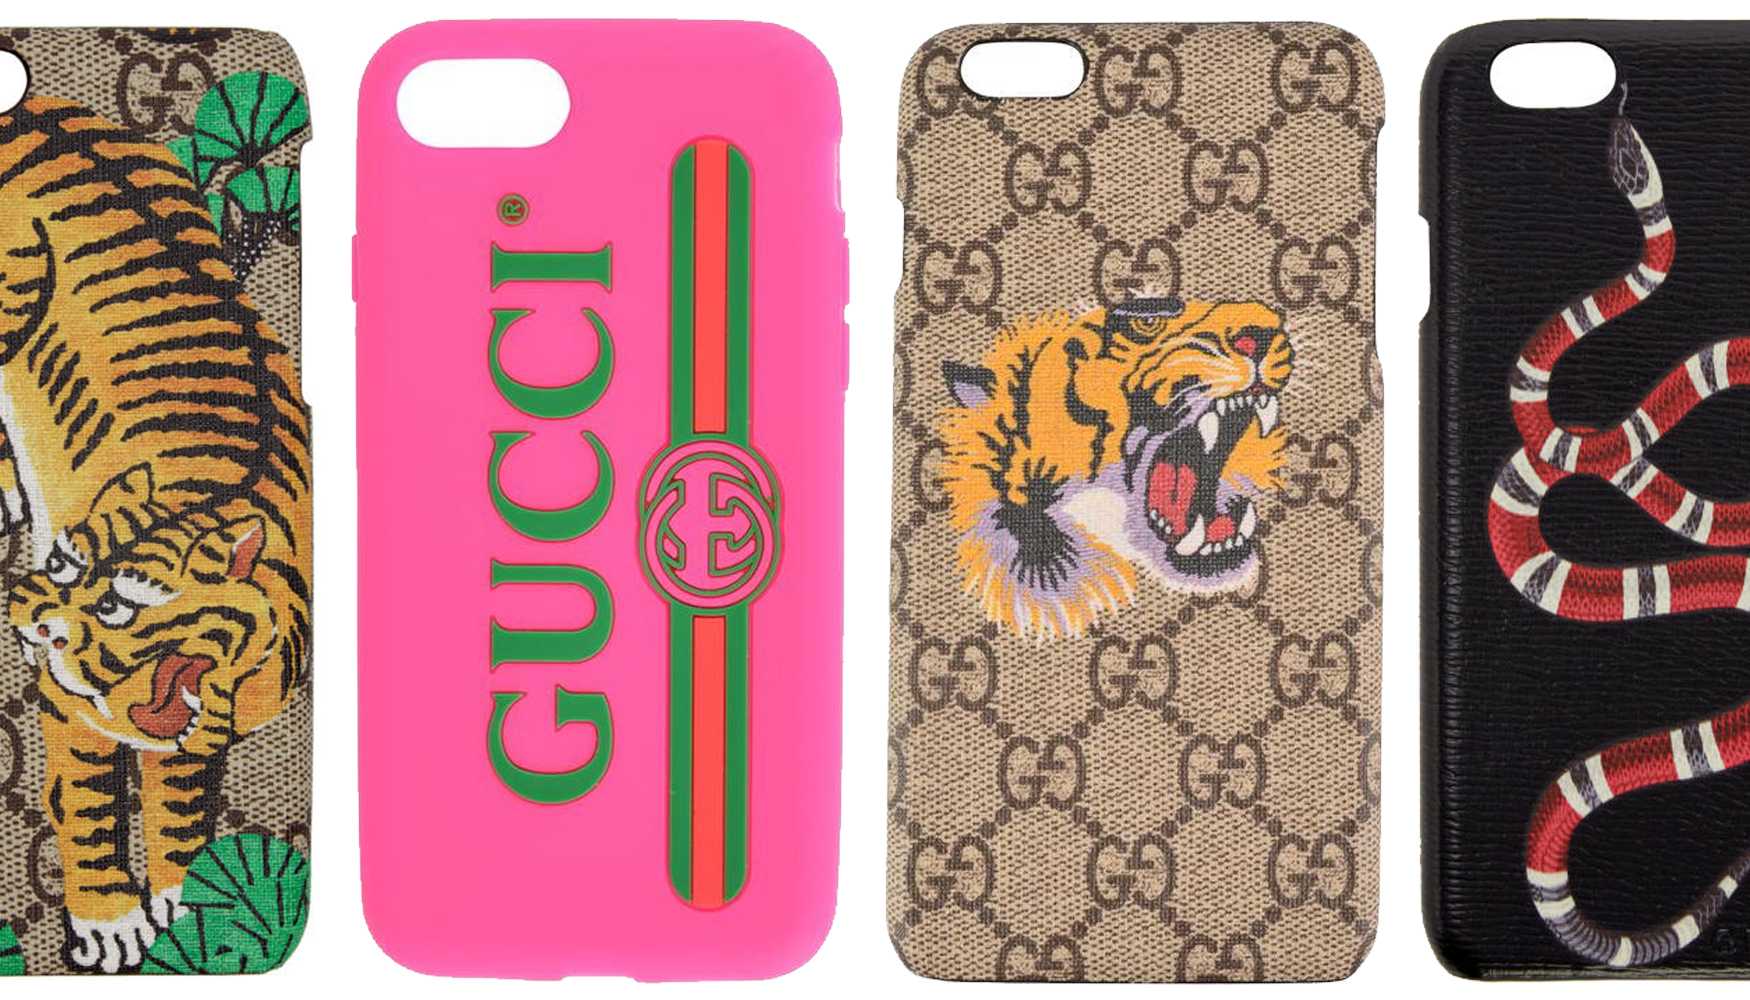 Trives Barnlig Sammenlignelig Cop The Look: The Freshest Gucci iPhone Cases For The iPhone 6 And 7 |  Fupping